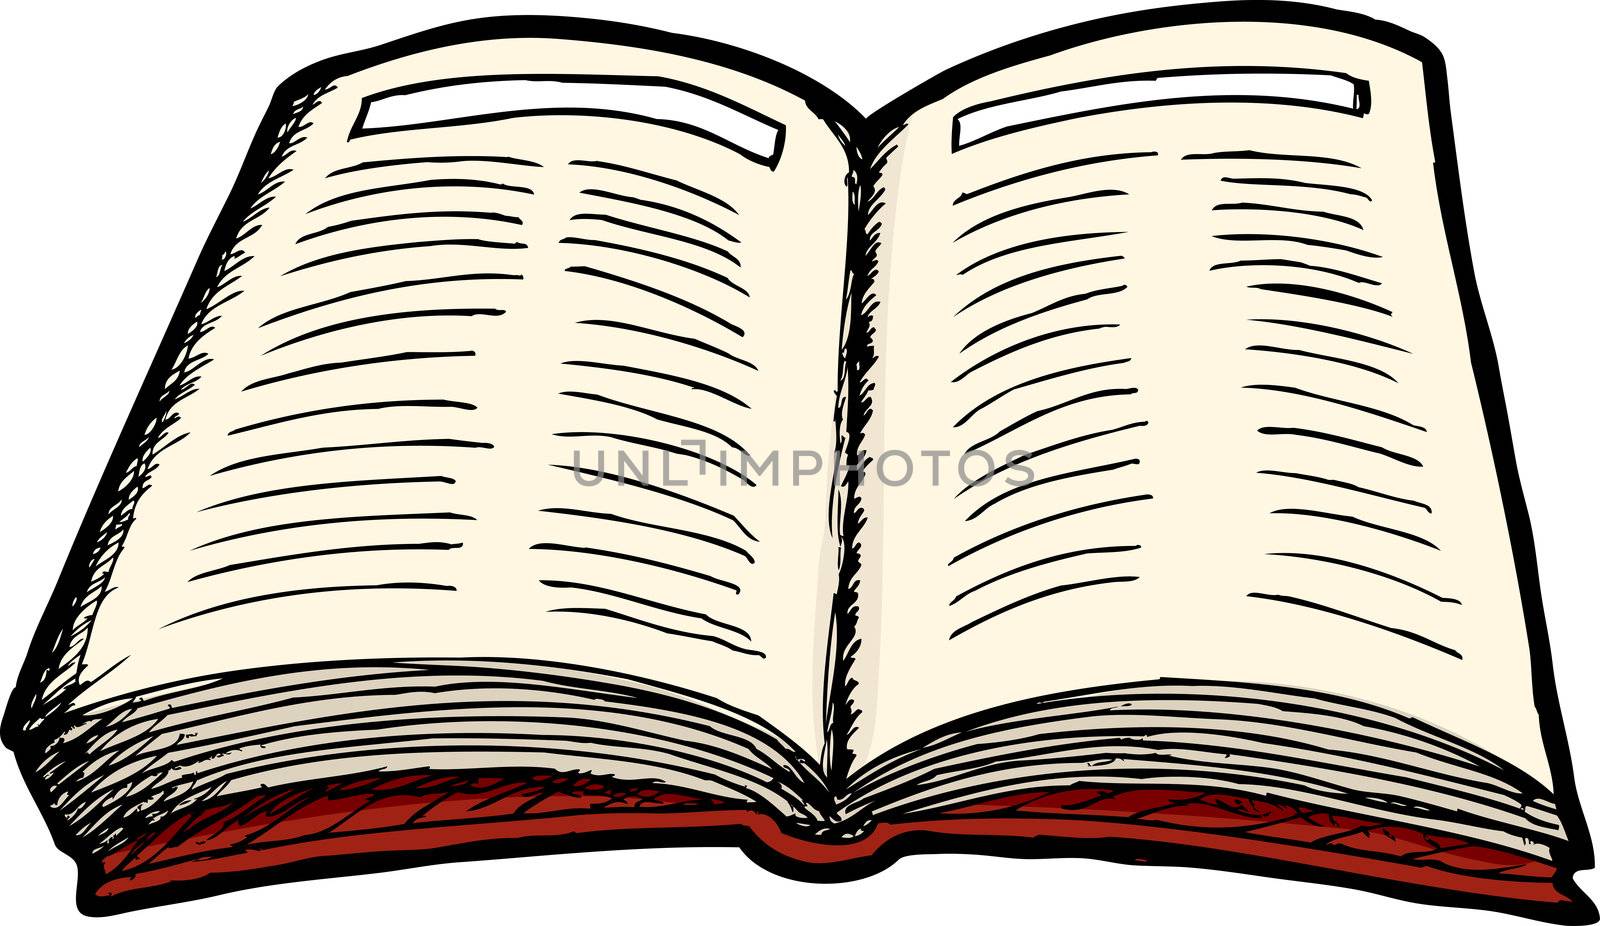 Illustration of an isolated generic open hardcover book